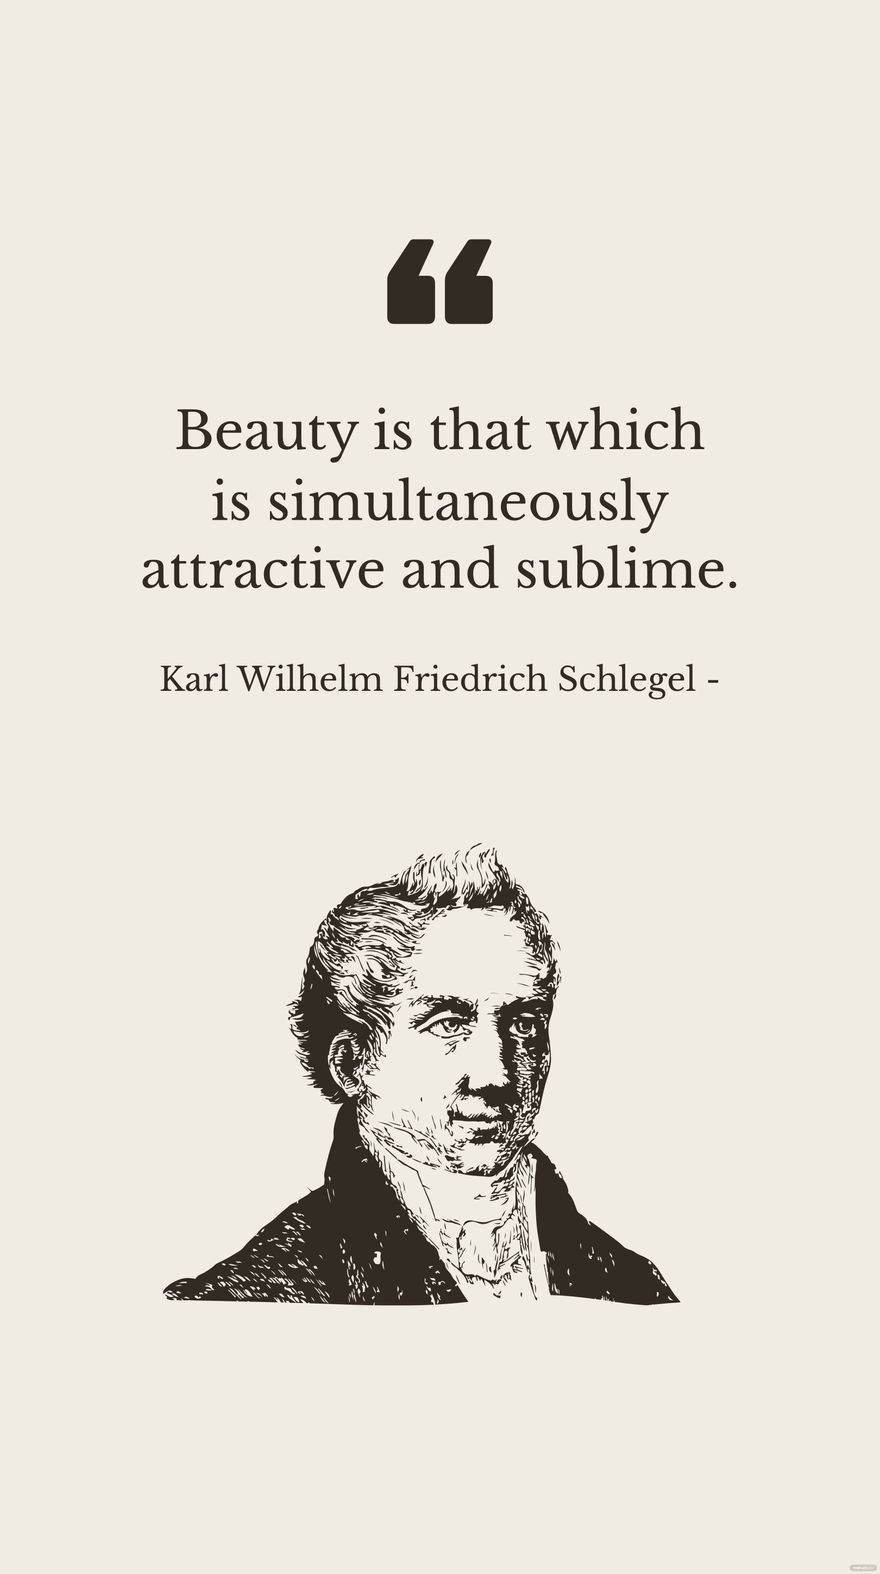 Free Karl Wilhelm Friedrich Schlegel - Beauty is that which is simultaneously attractive and sublime.